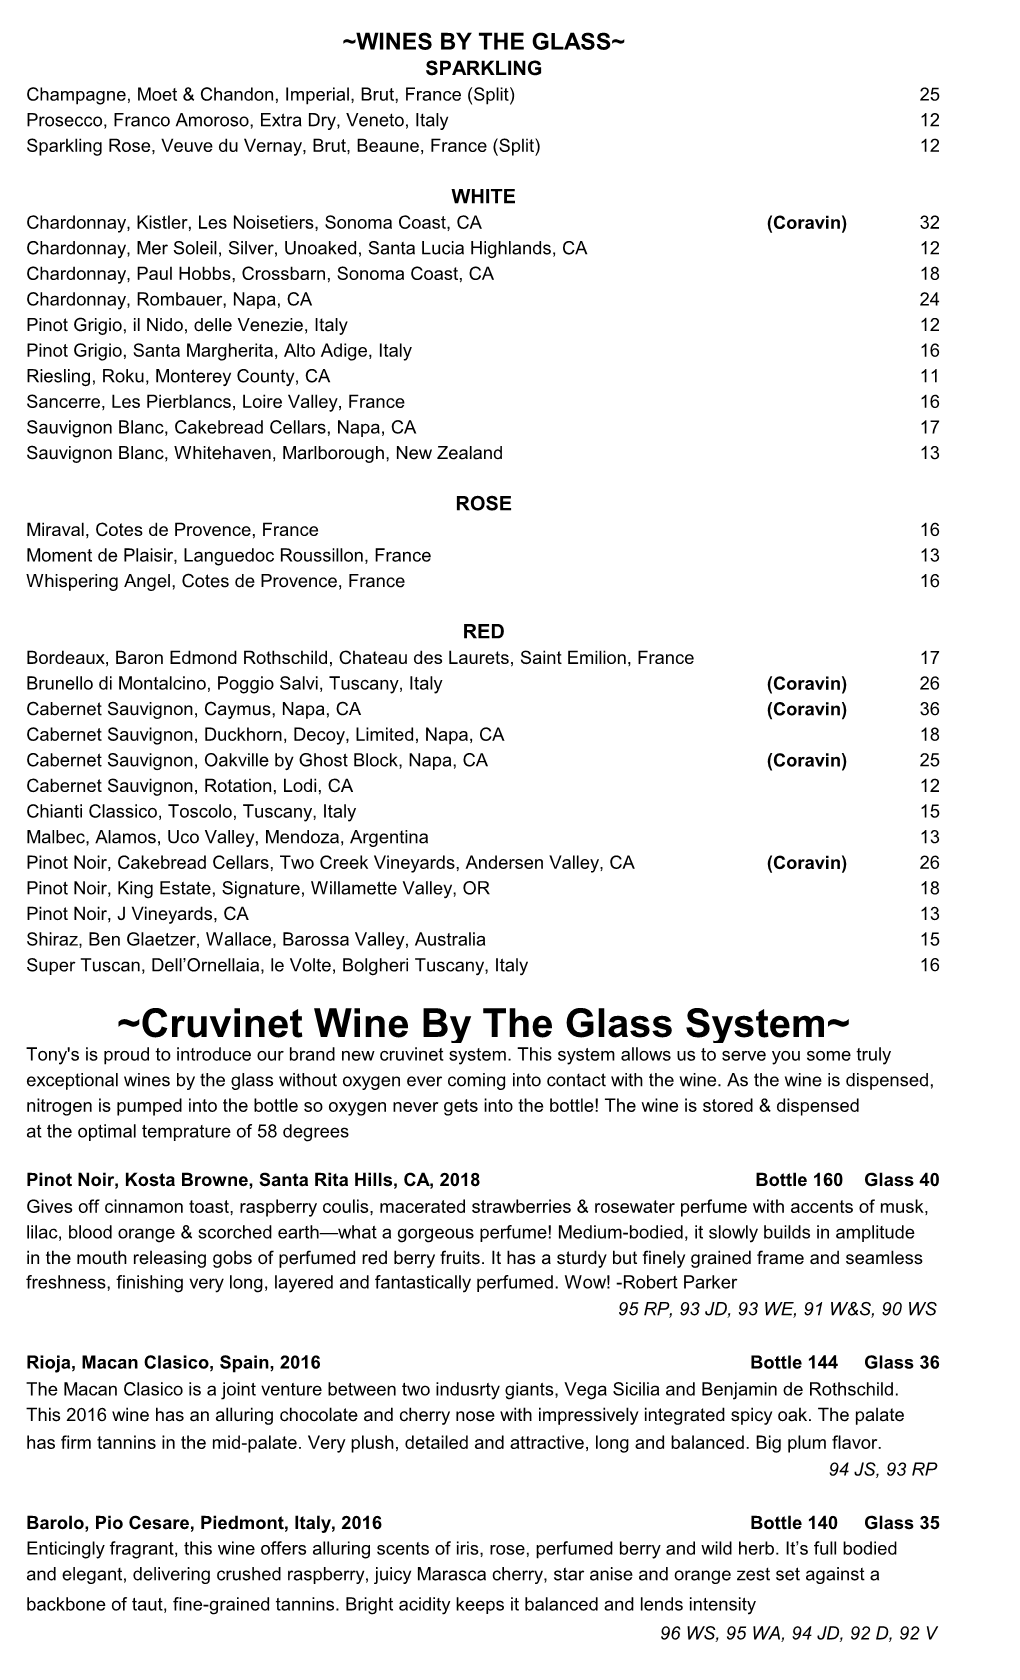 Cruvinet Wine by the Glass System~ Tony's Is Proud to Introduce Our Brand New Cruvinet System